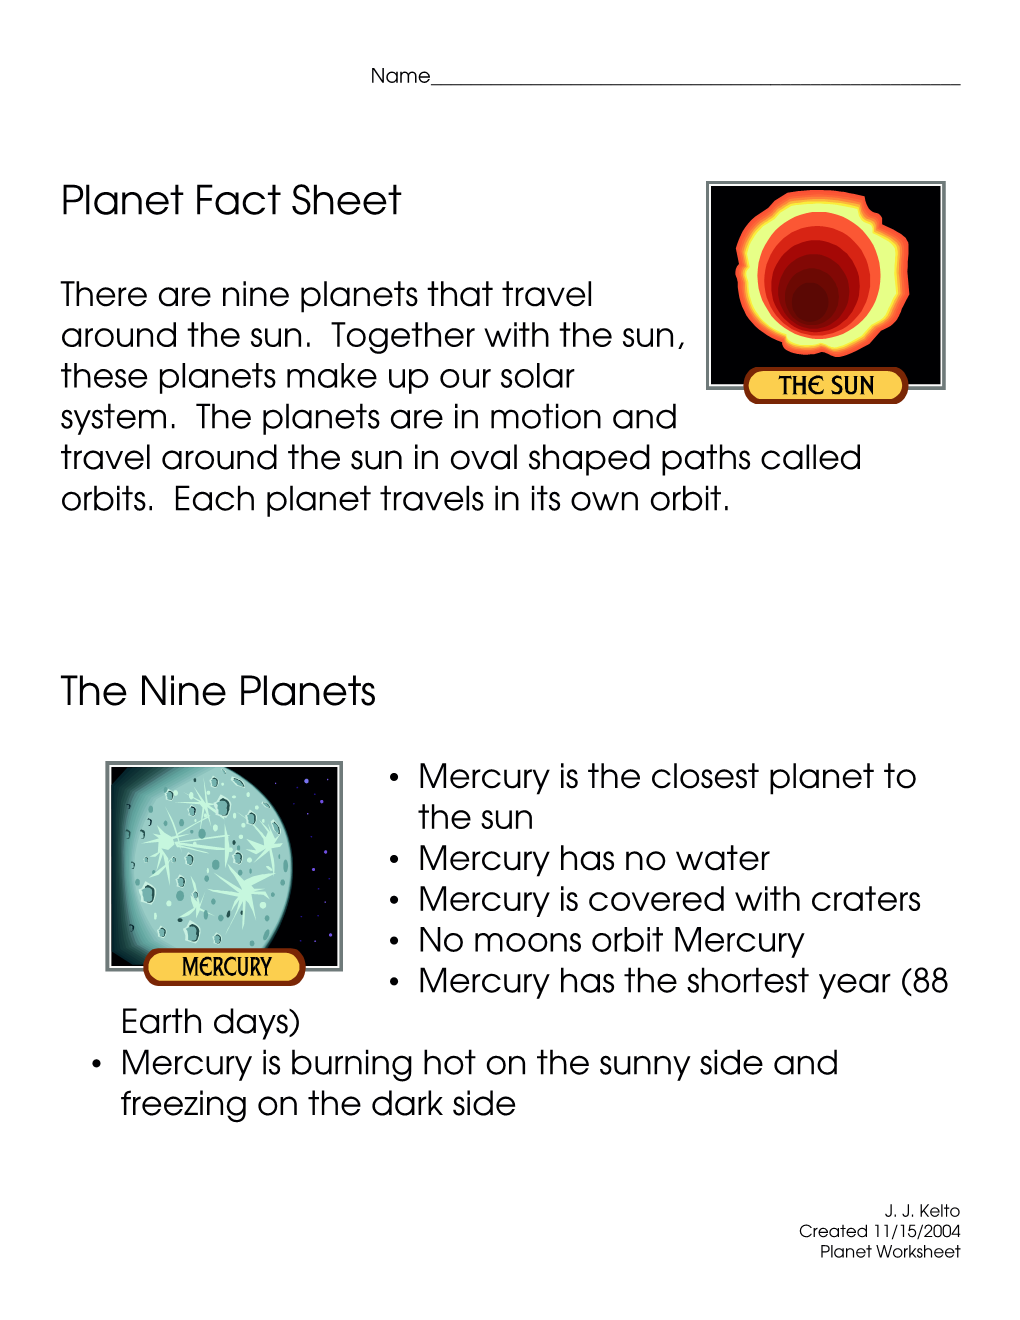 Planet Fact Sheet the Nine Planets